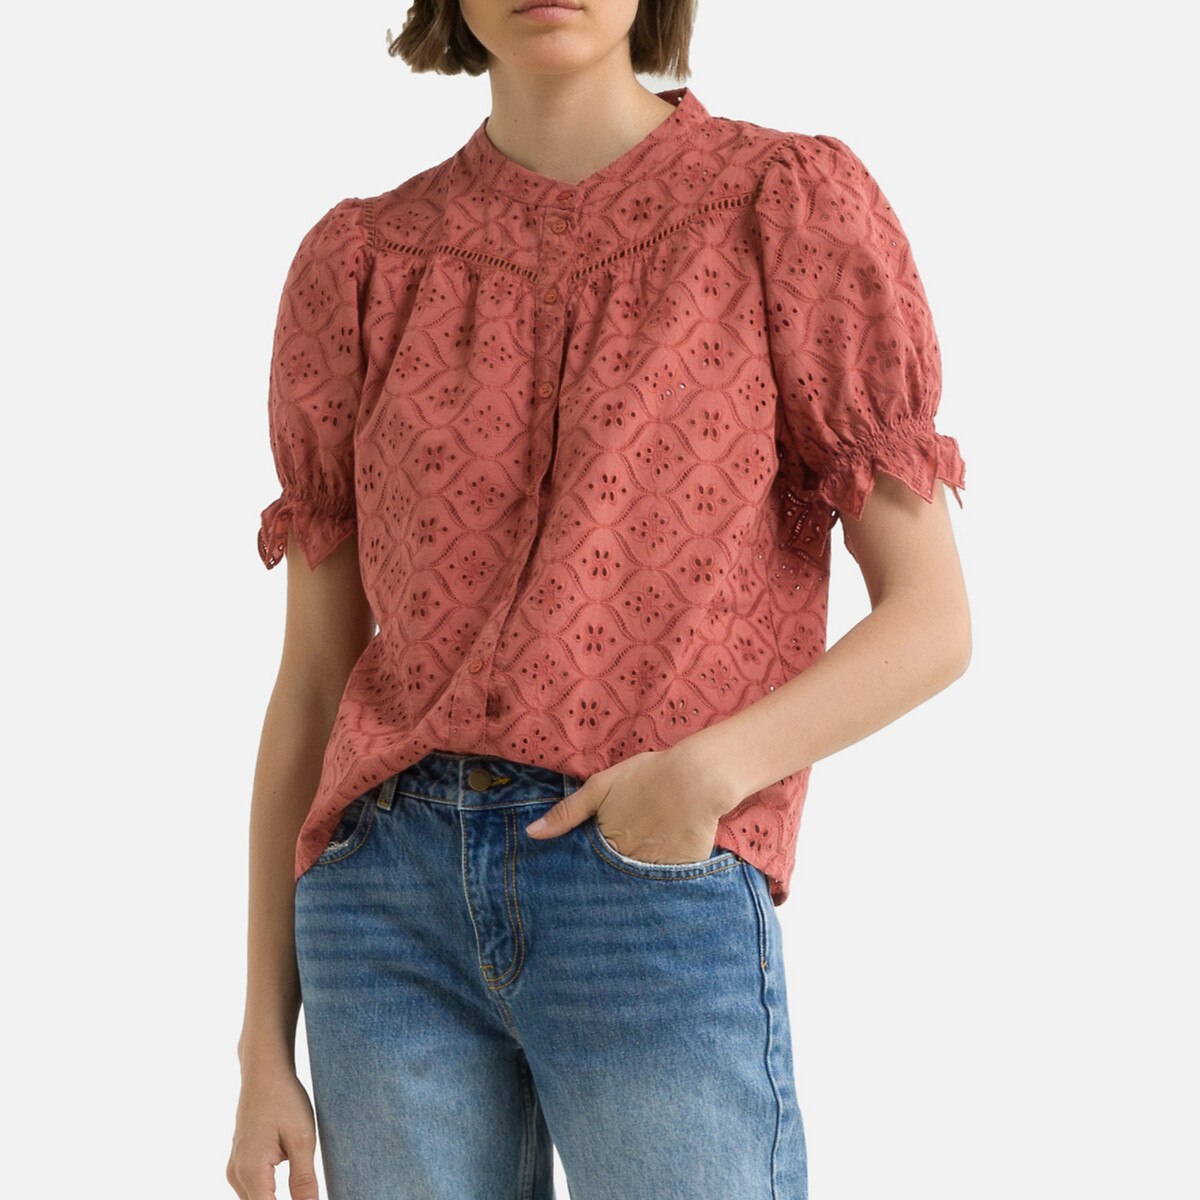 Birk Broderie Anglaise Blouse with Short Sleeves in Cotton